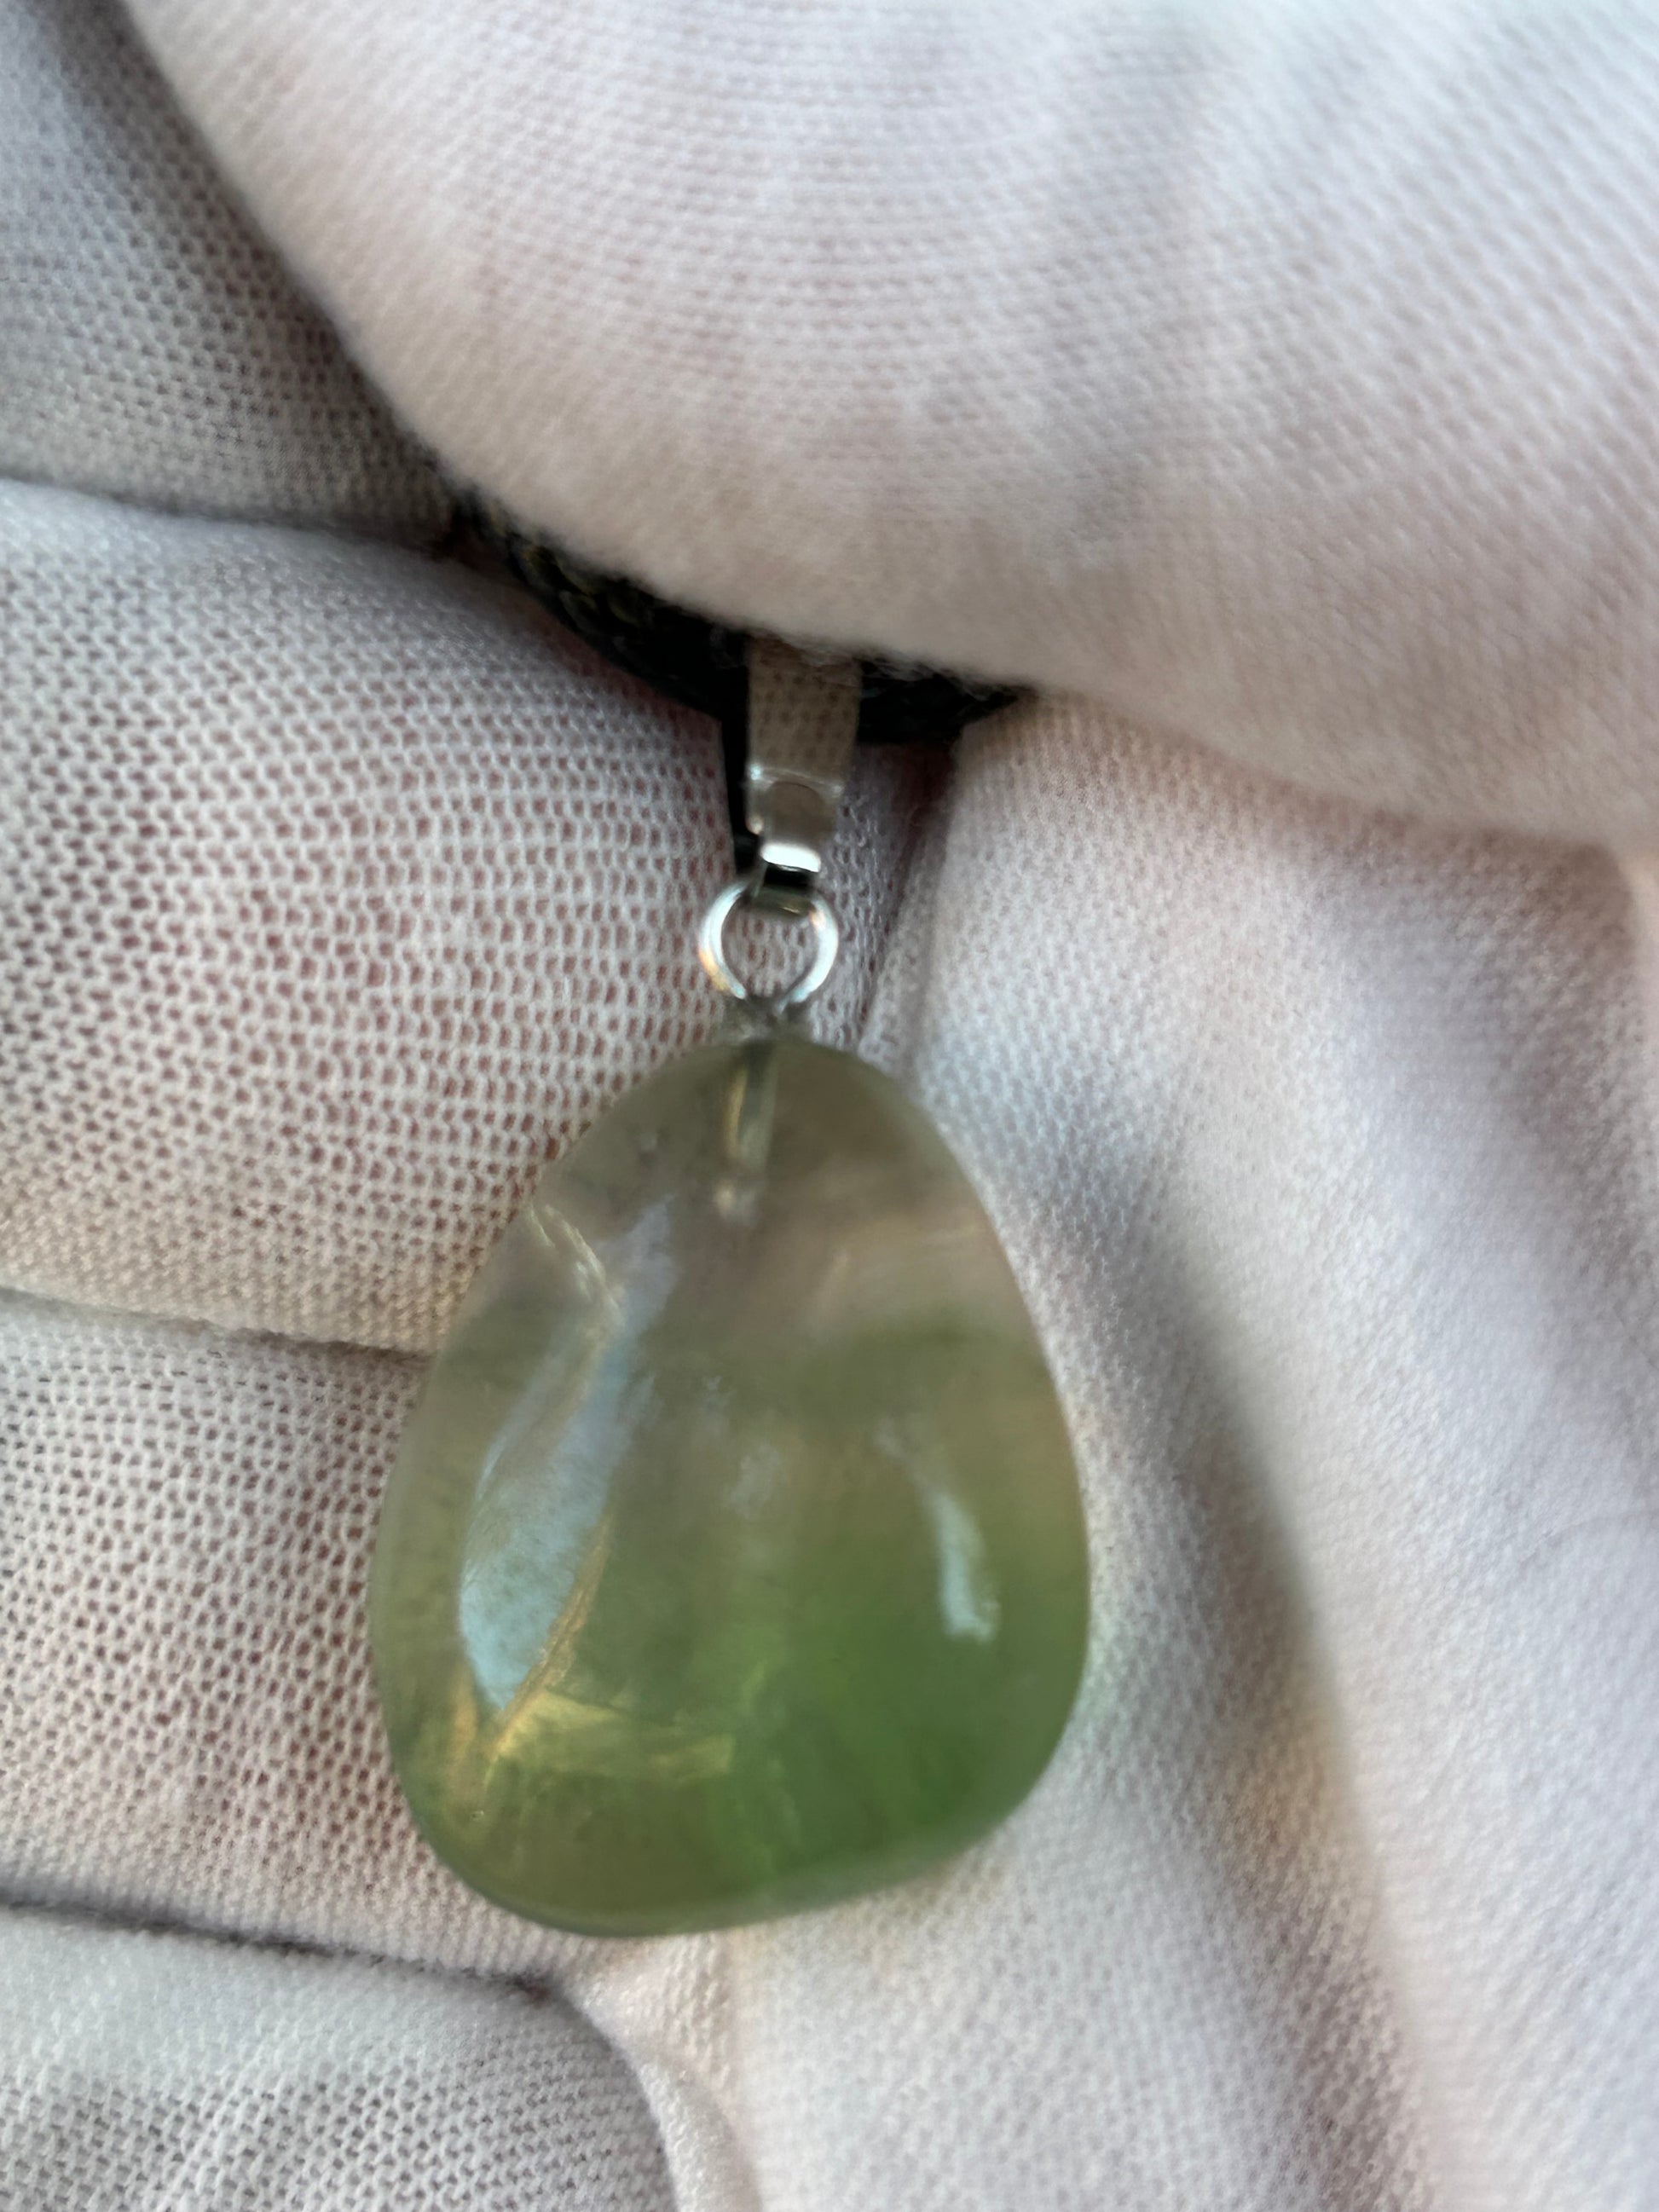 small green fluorite irregular shape polished pendant with silver pendant attachment and black cord necklace